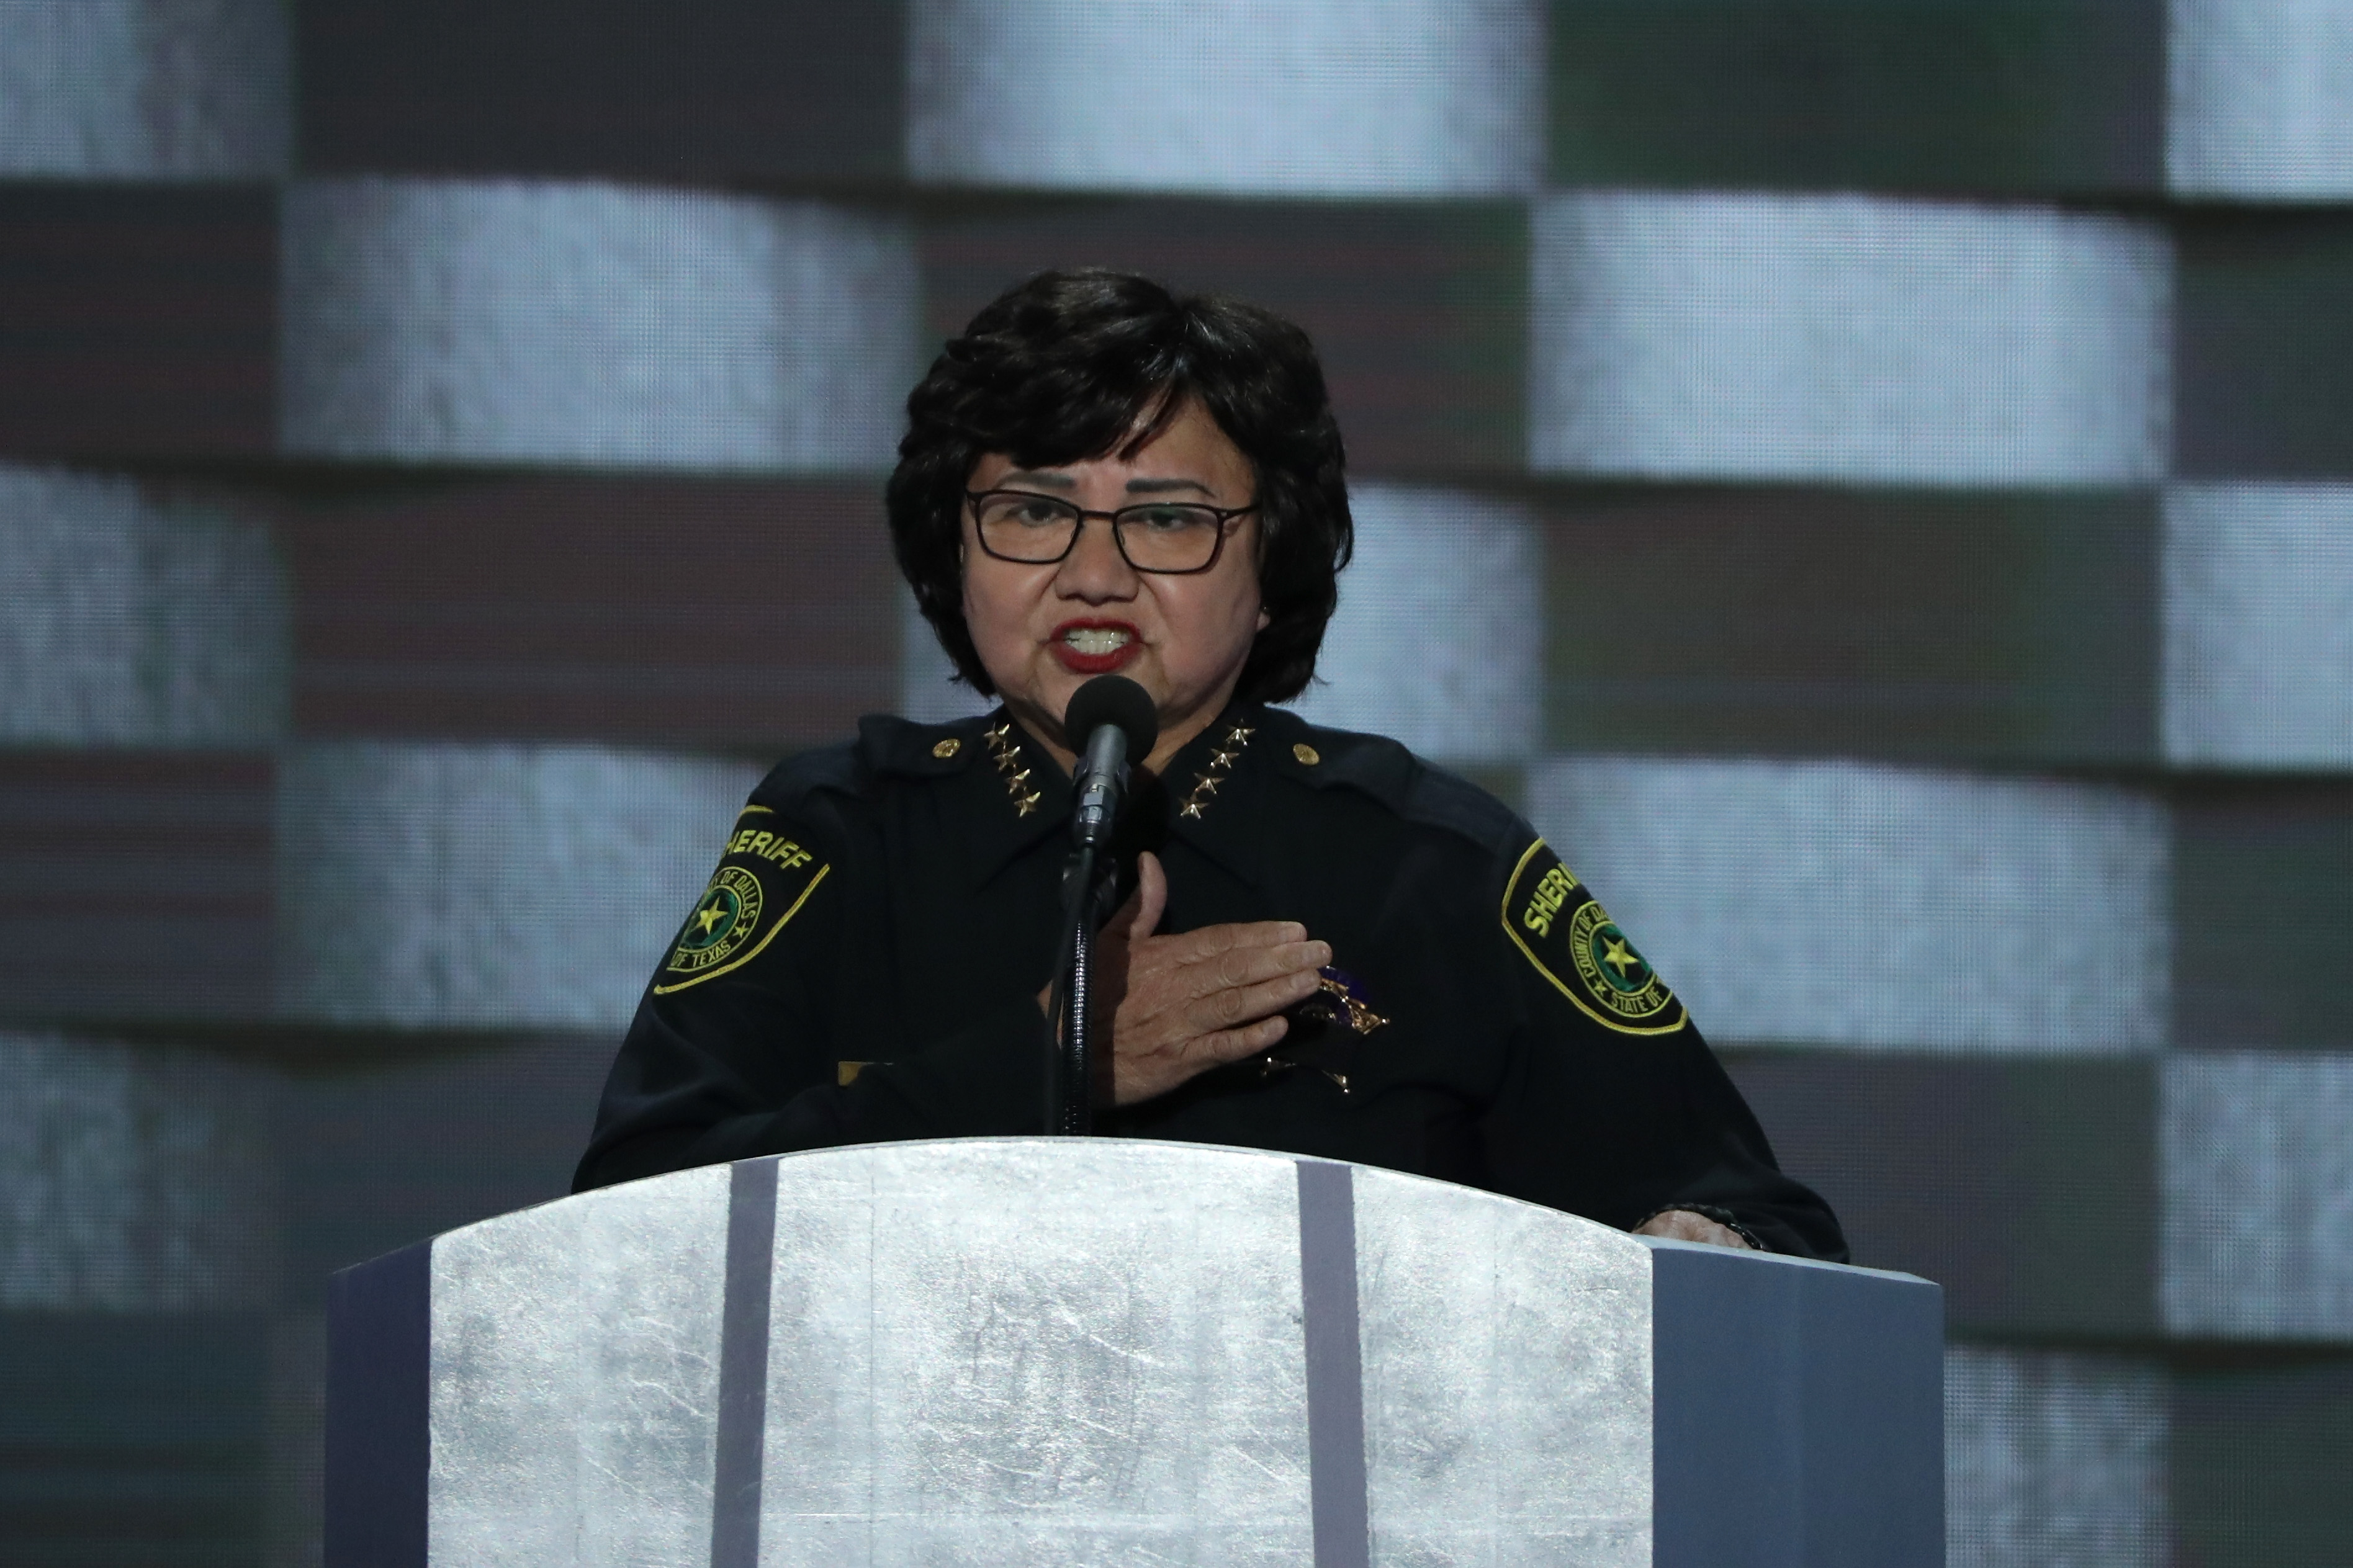 Then-Dallas Sheriff Lupe Valdez delivers remarks on the fourth day of the Democratic National Convention at the Wells Fargo Center, July 28, 2016 in Philadelphia. (Alex Wong—Getty Images)